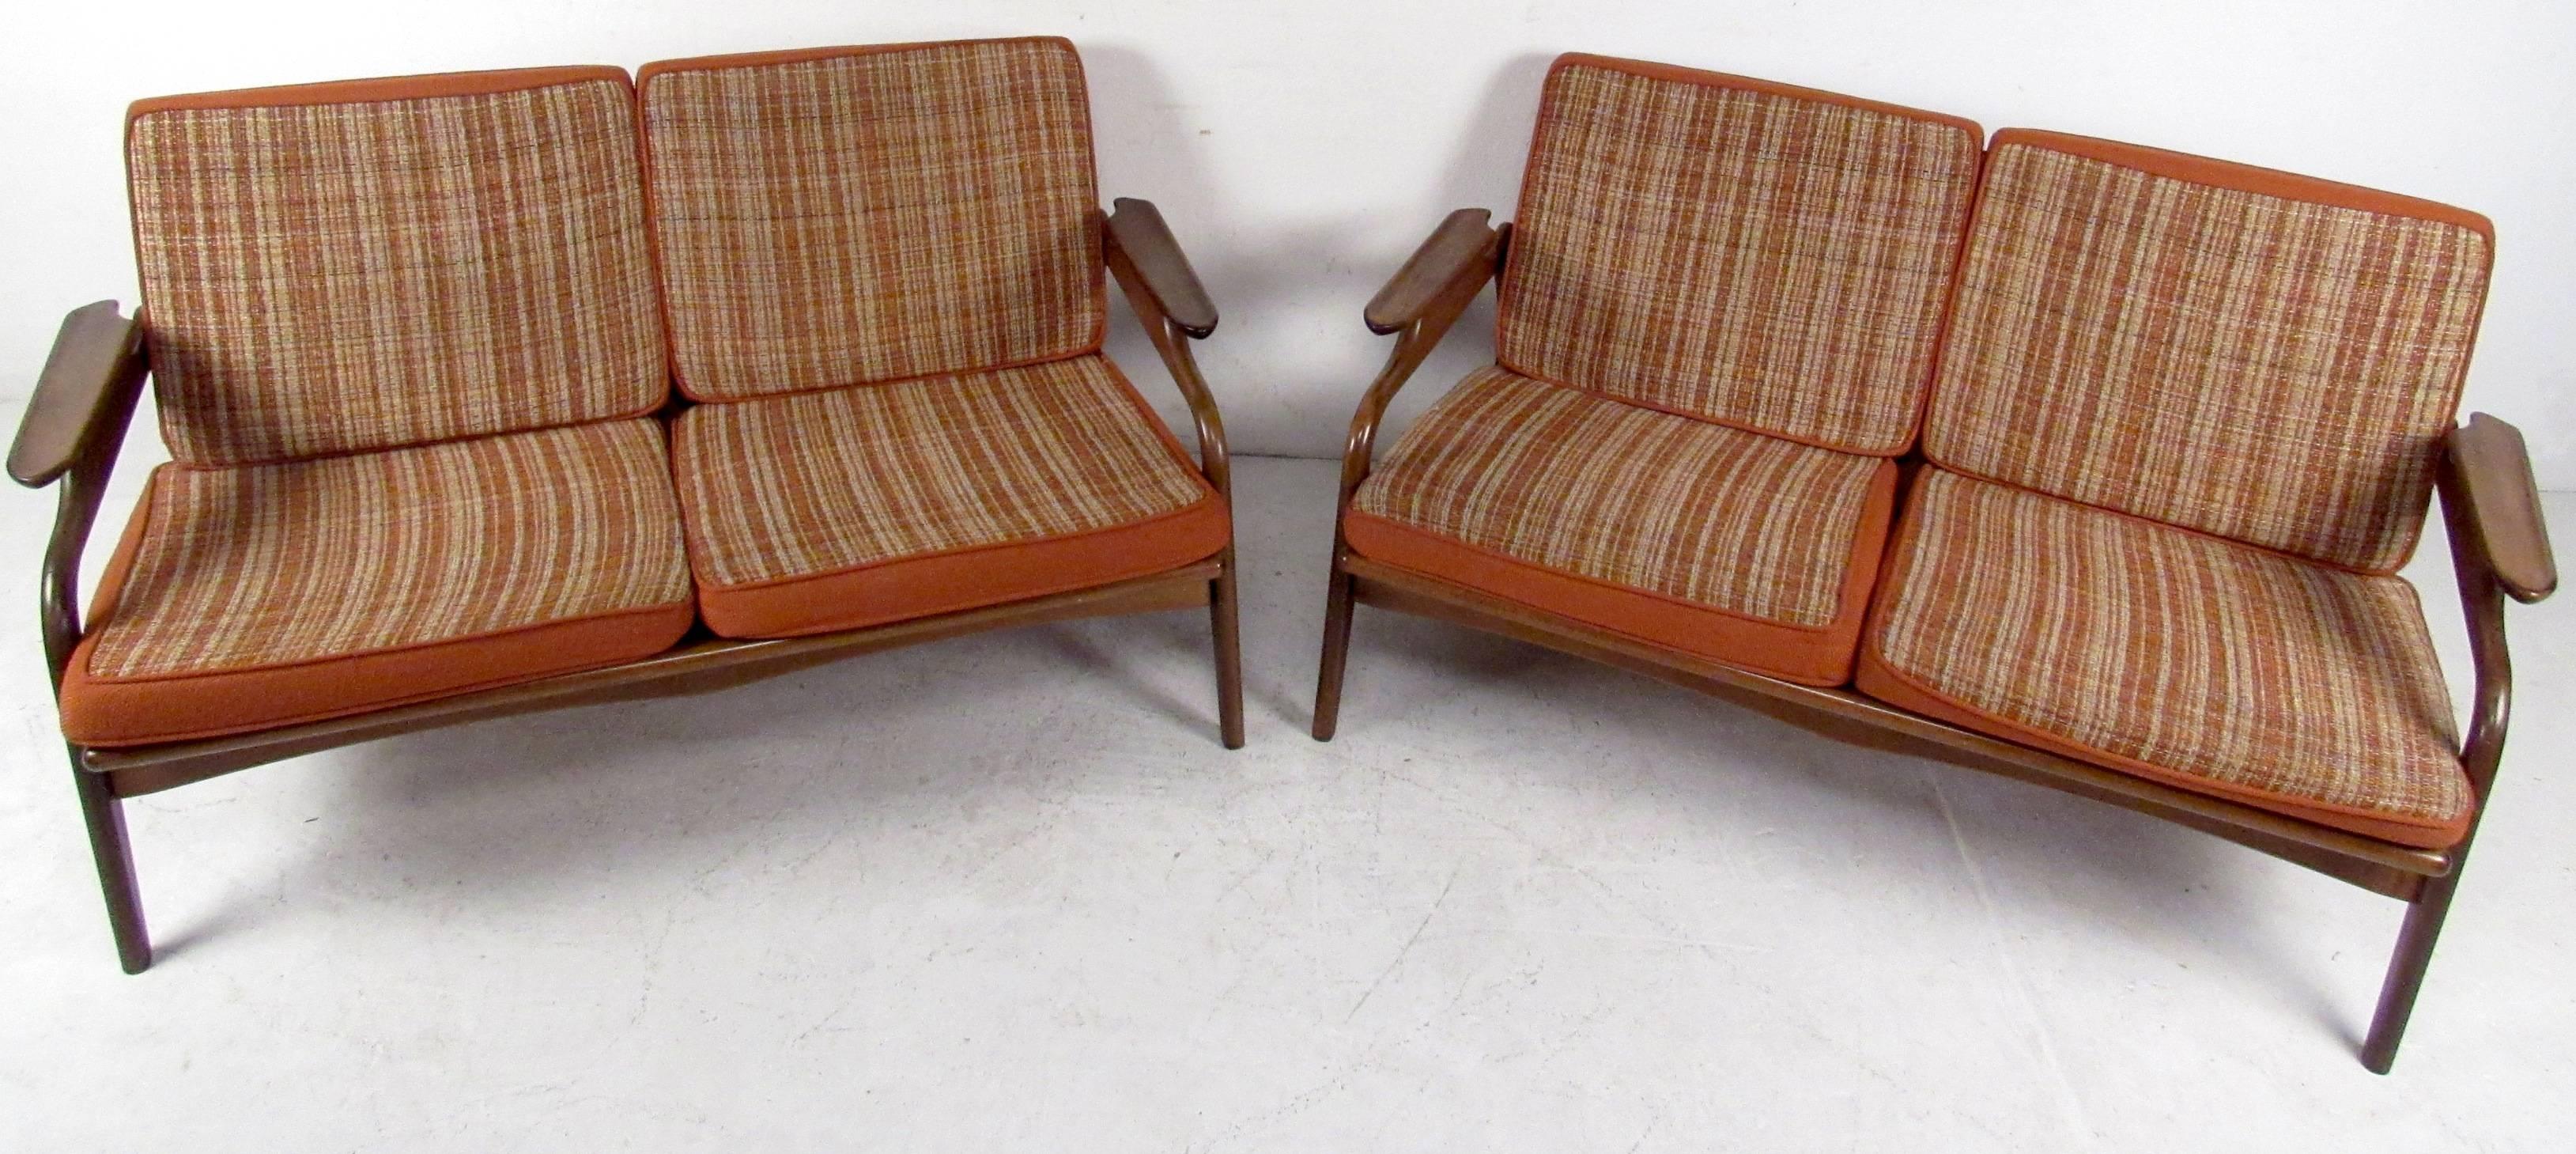 Upholstery Two Mid-Century Upholstered Settees